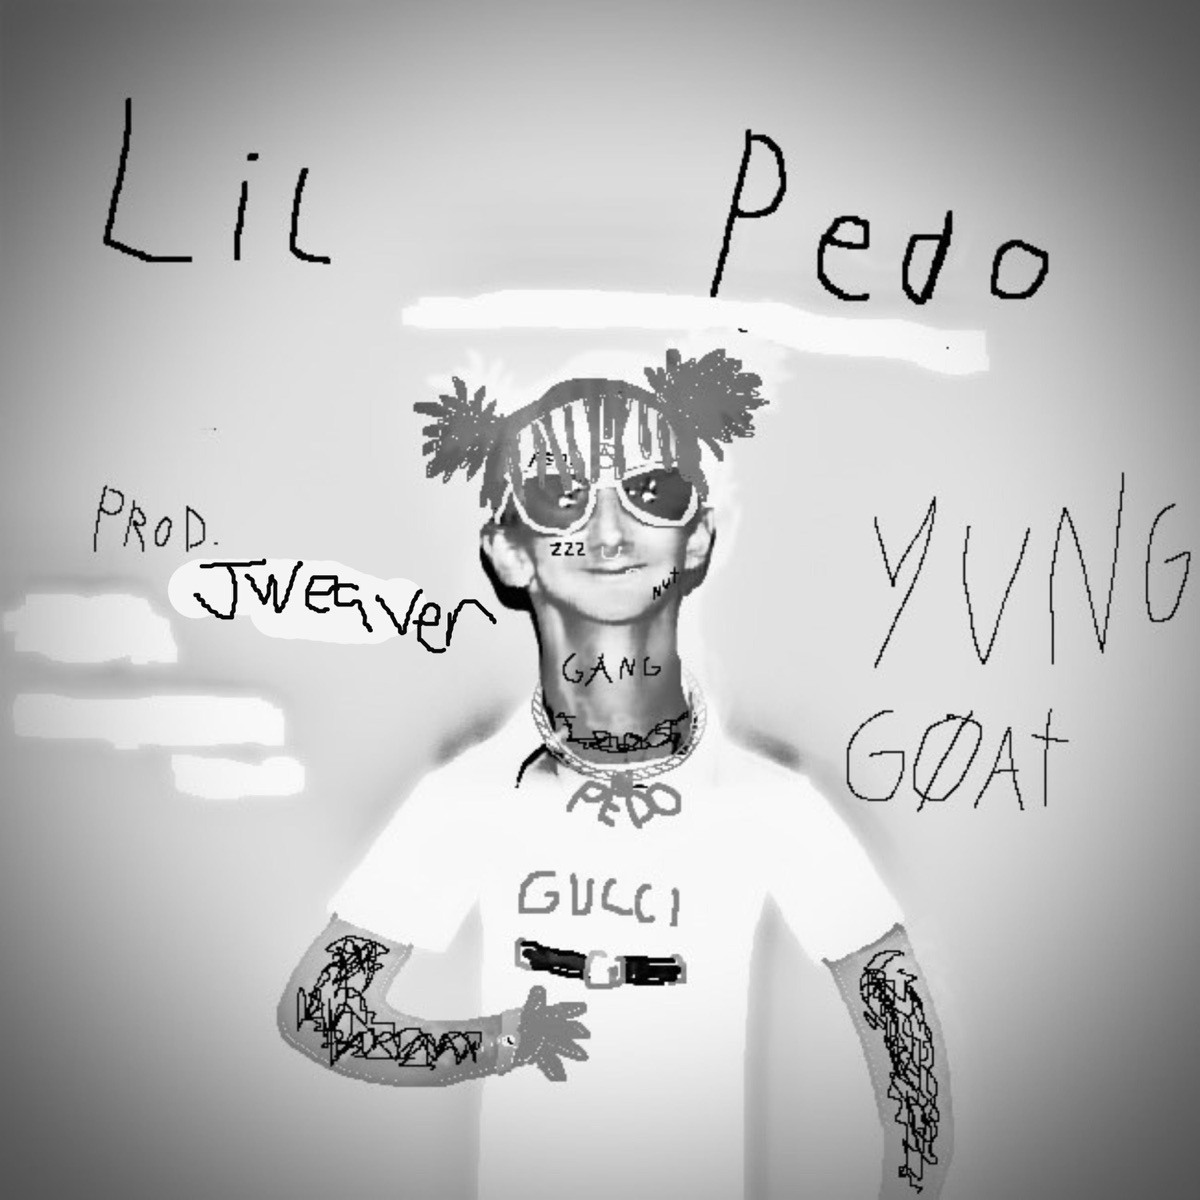 Fortnite Sex (feat. Lil Sex Offender) - Single by Lil Pedo on Apple Music